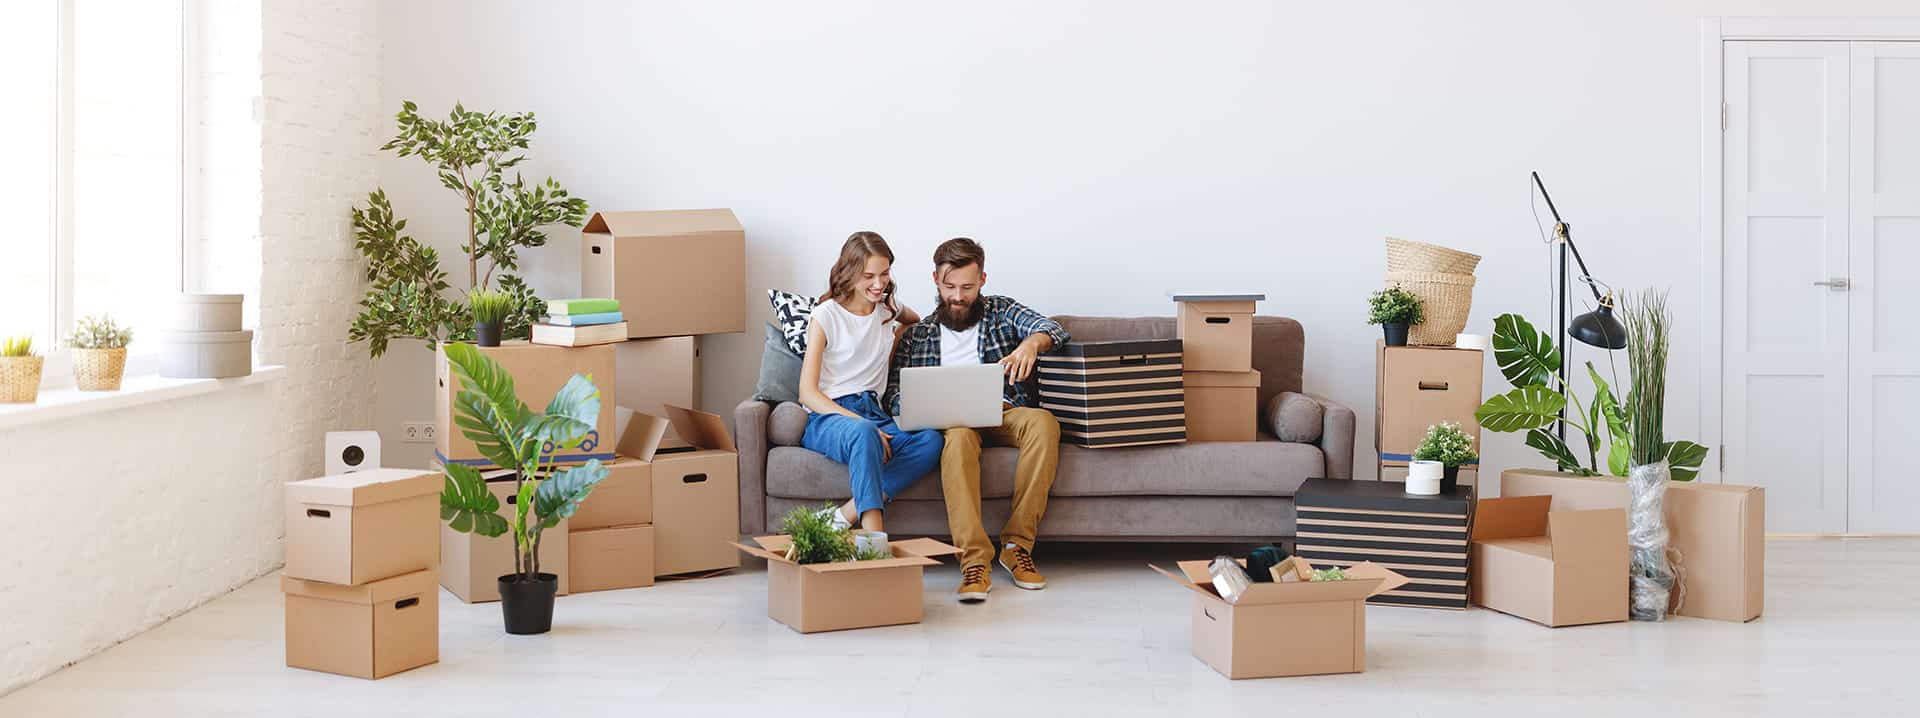 How much to tip Movers: Be smart when tipping great Movers